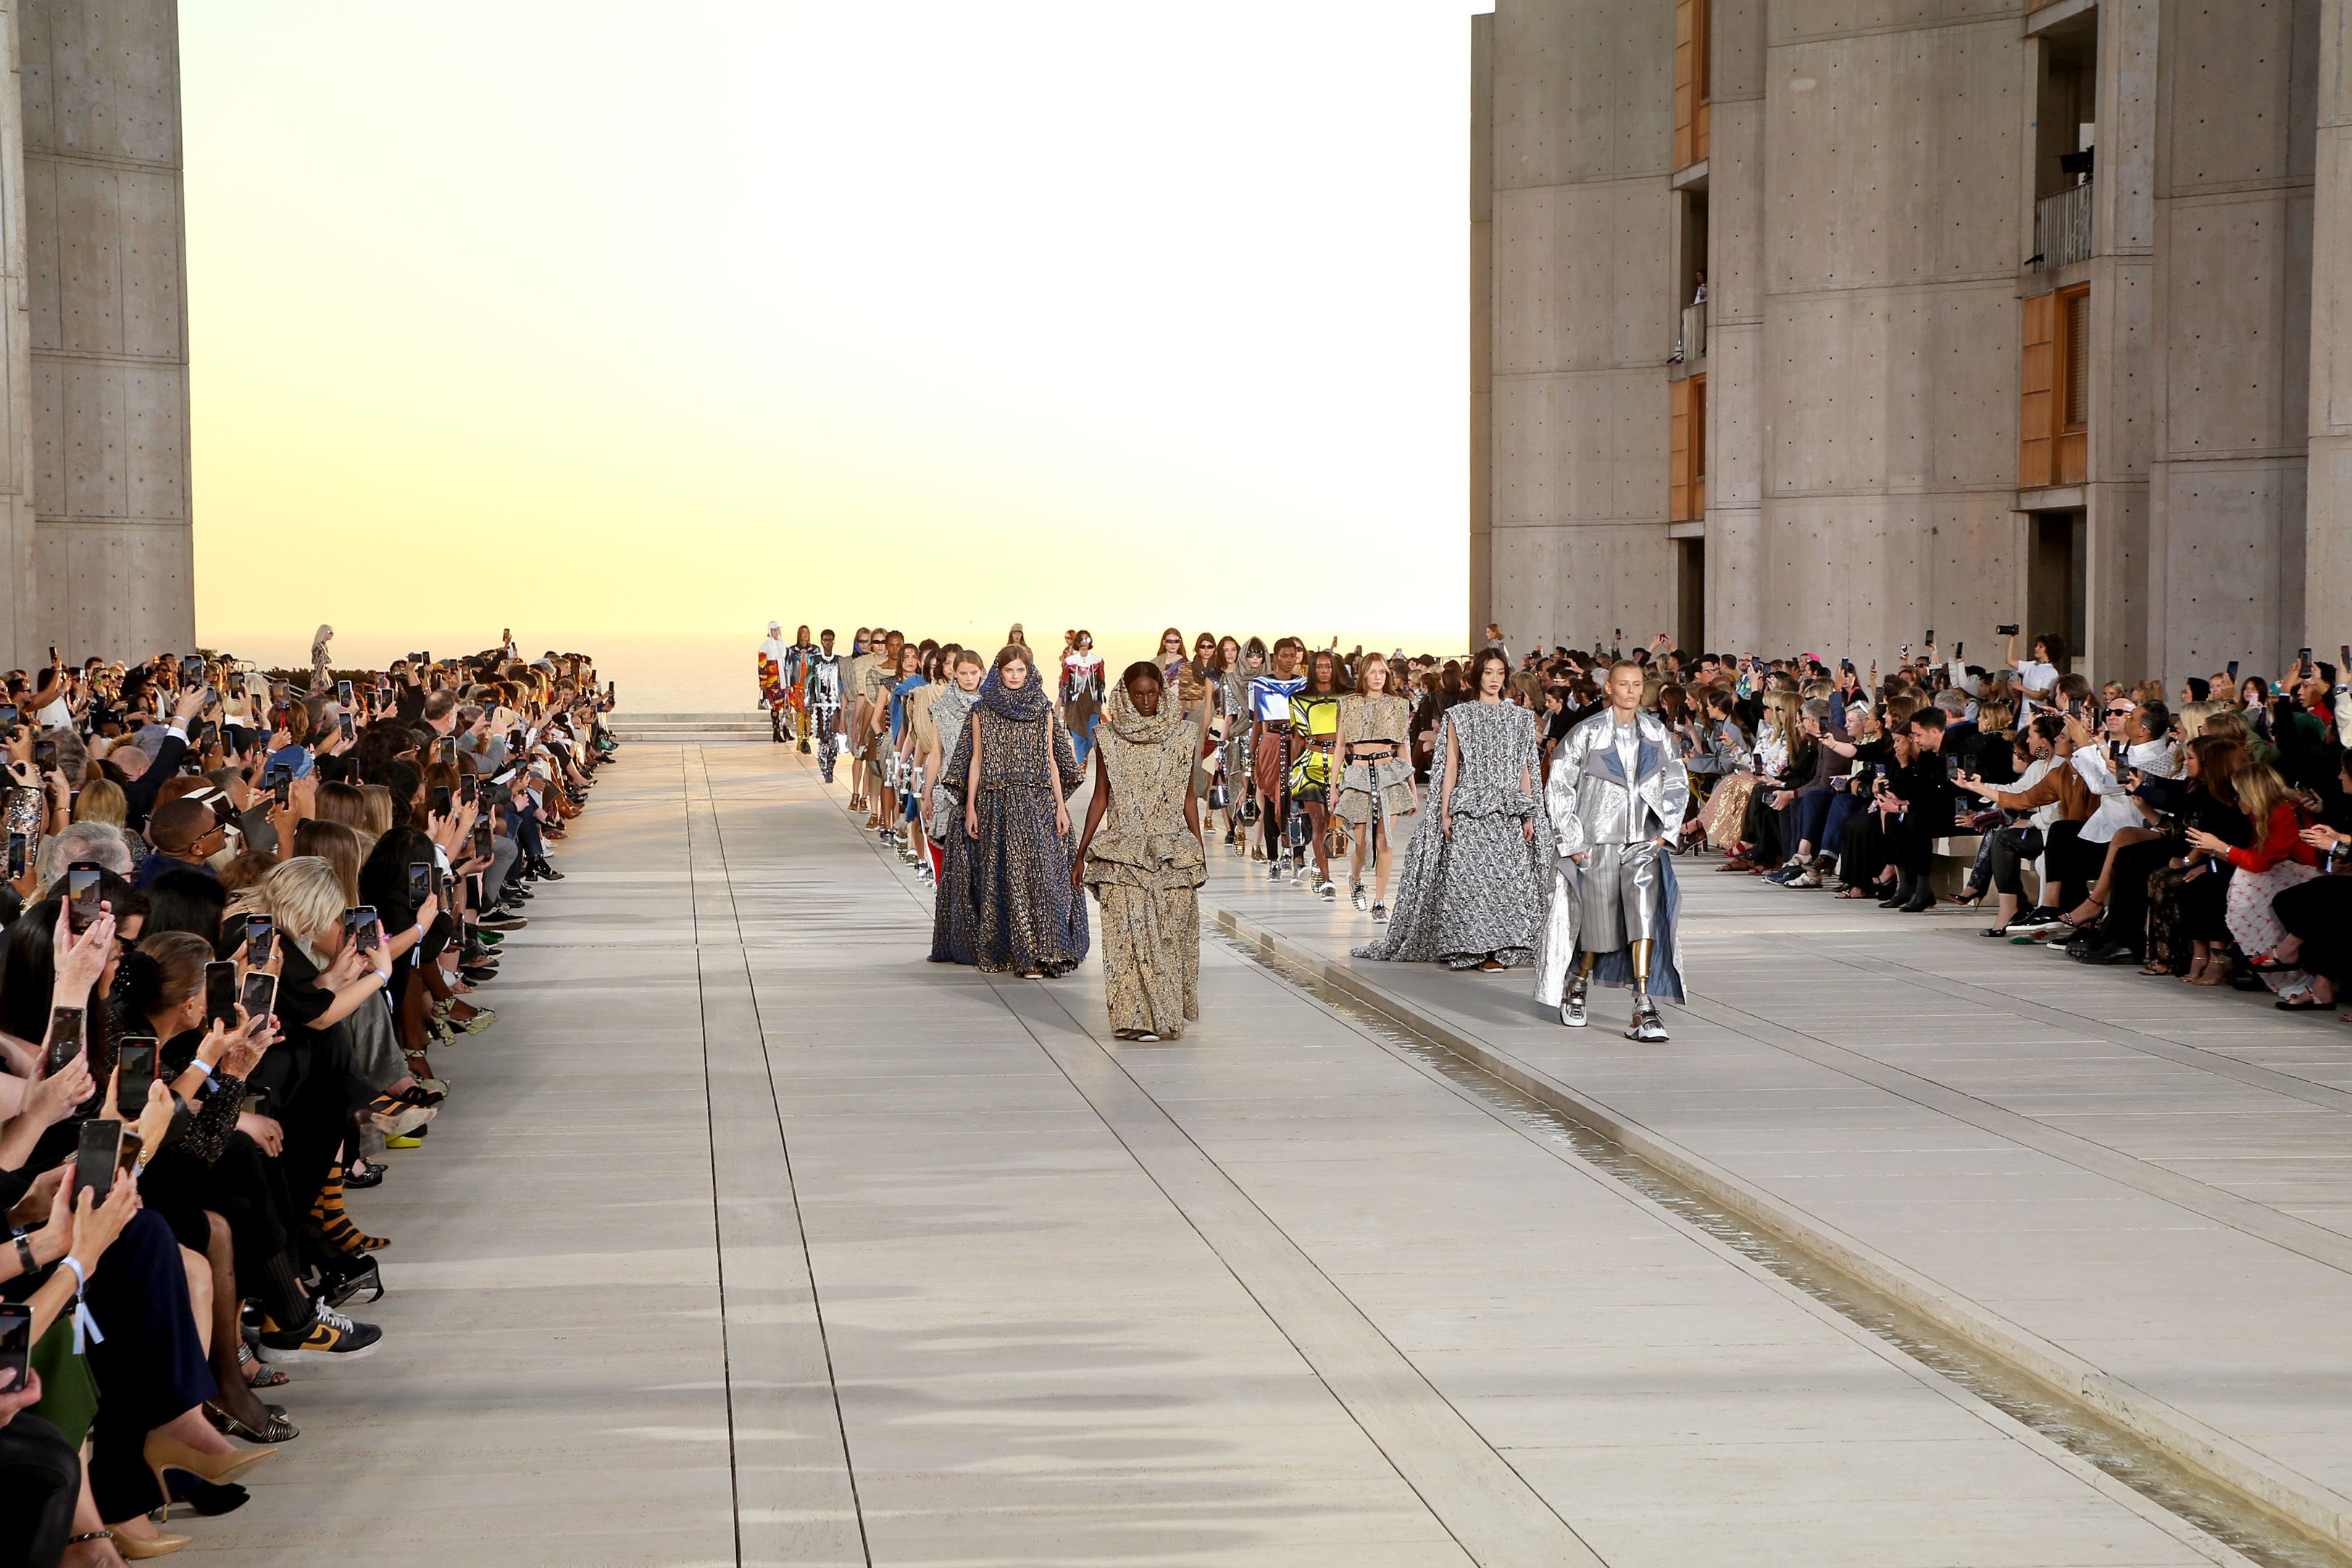 Highlights from the Louis Vuitton cruise 2023 show